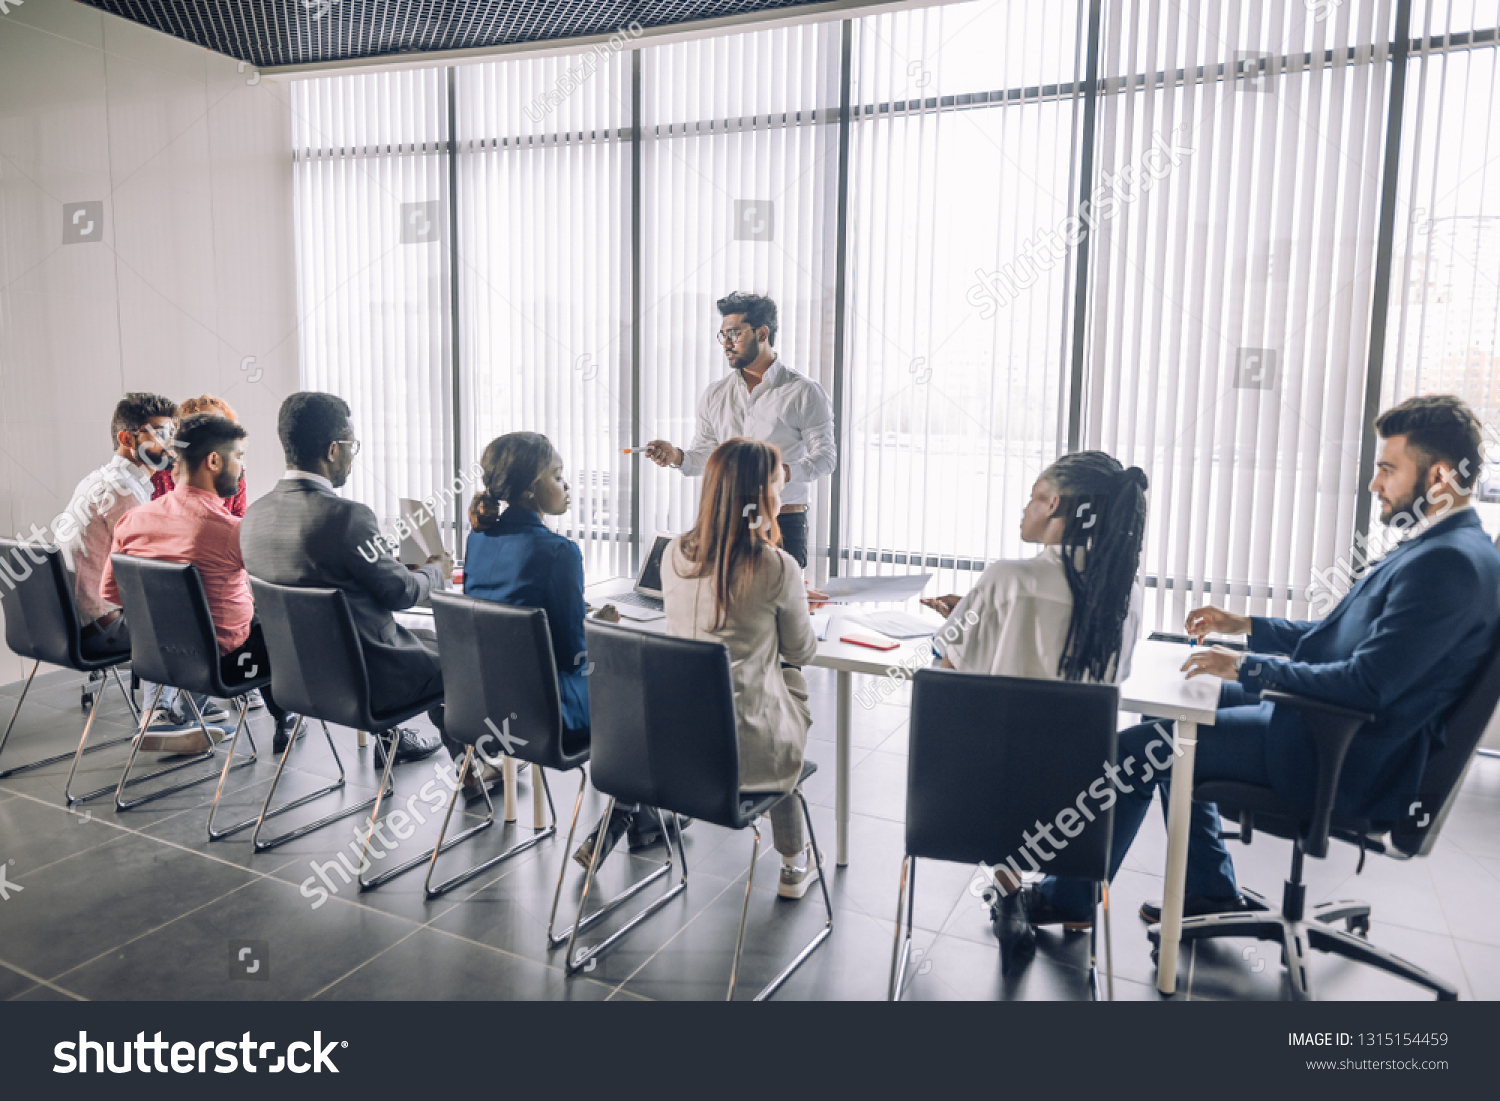 stock-photo-backside-of-group-of-diverse-multiracial-applicants-for-a-vacant-post-or-corporate-job-sitting-in-a-1315154459